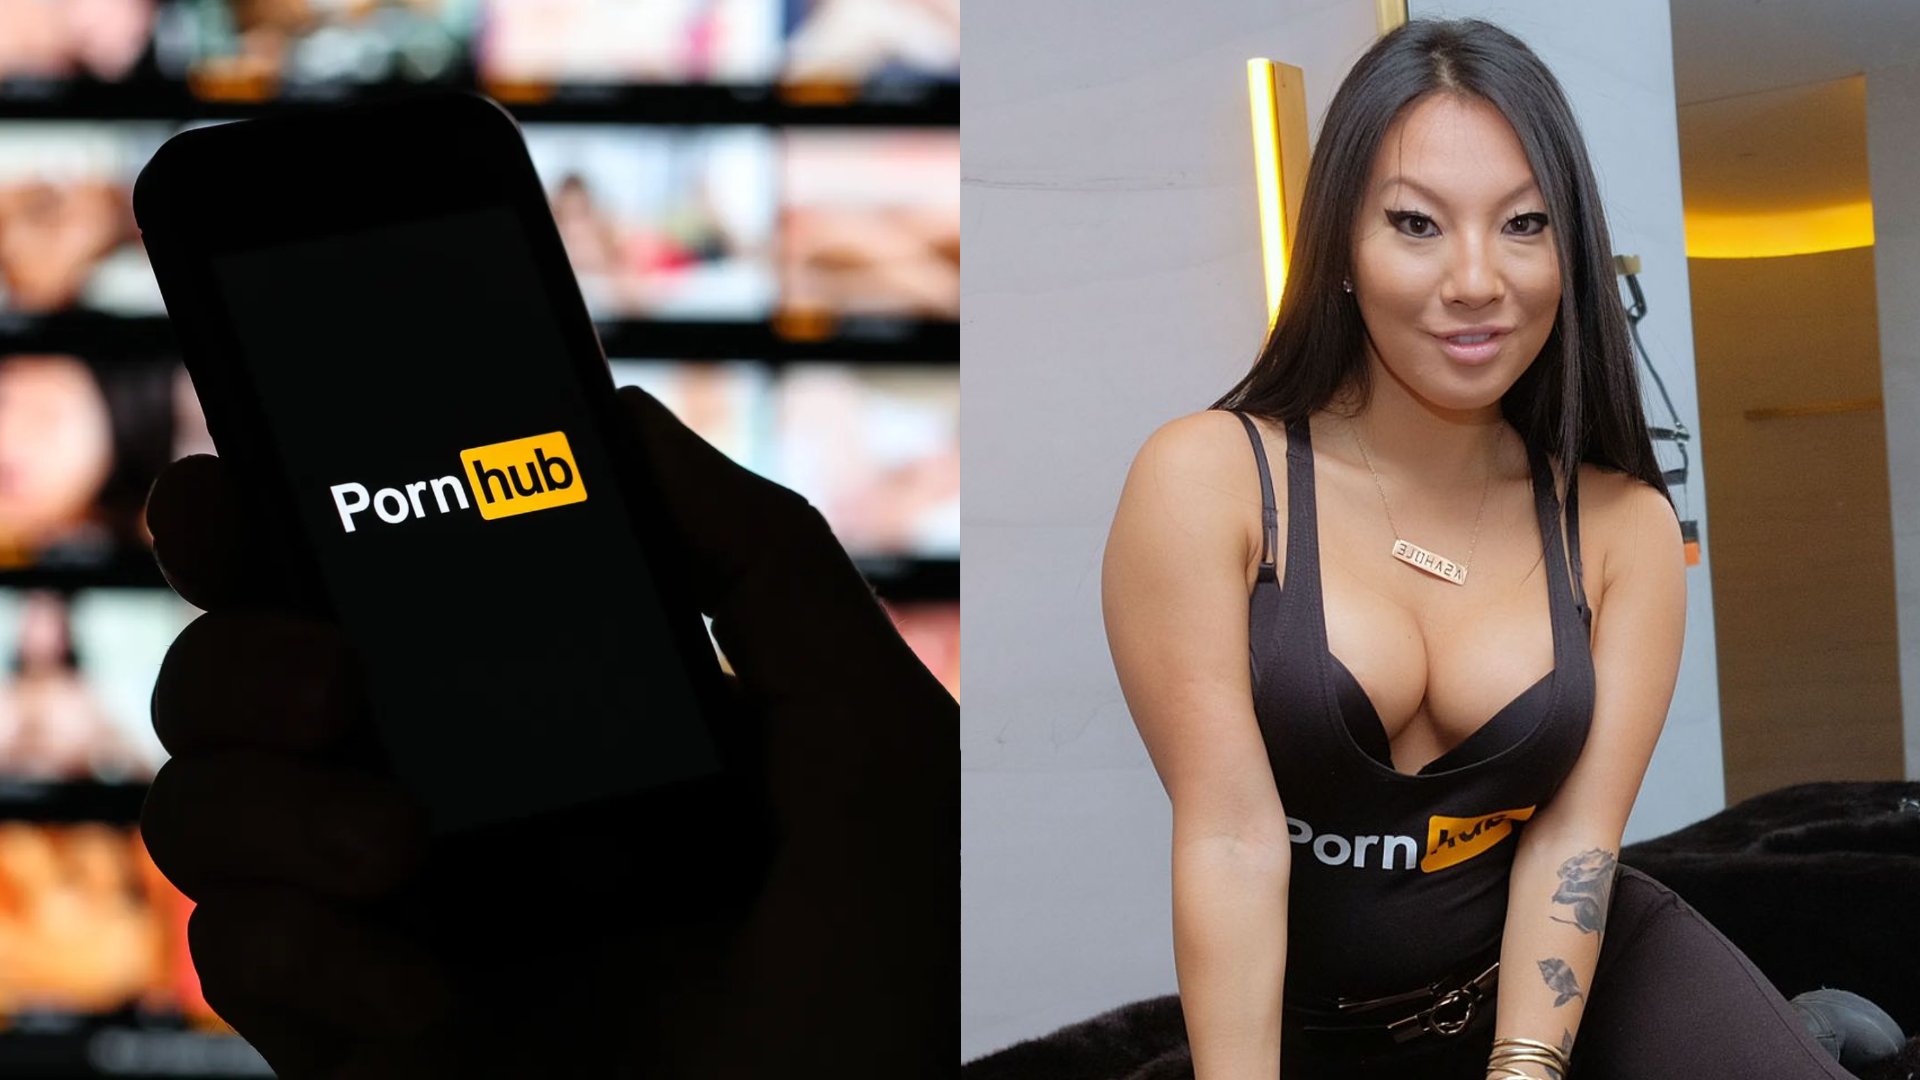 Plrnhub - Pornhub Sold To Private Equity Firm For Undisclosed Amount